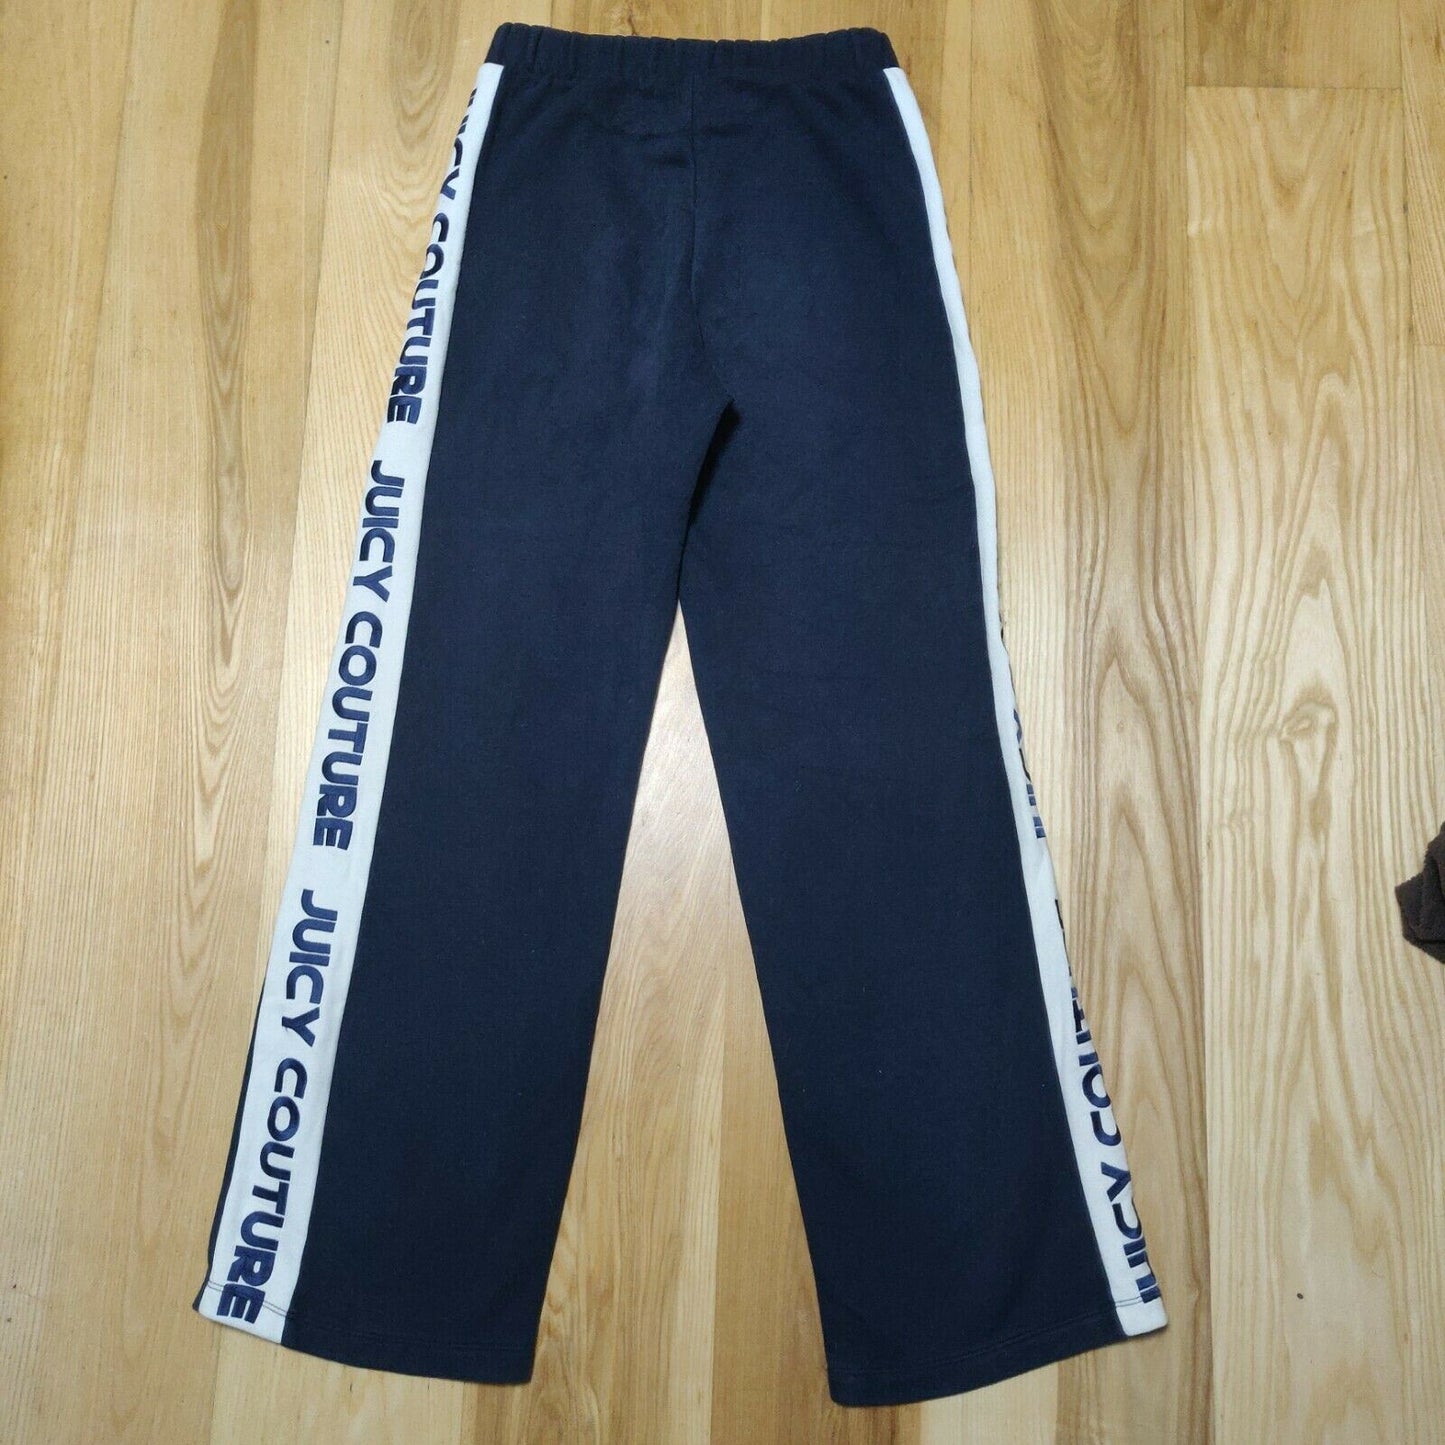 Juicy Couture Black Label Navy Joggers Women Size Small